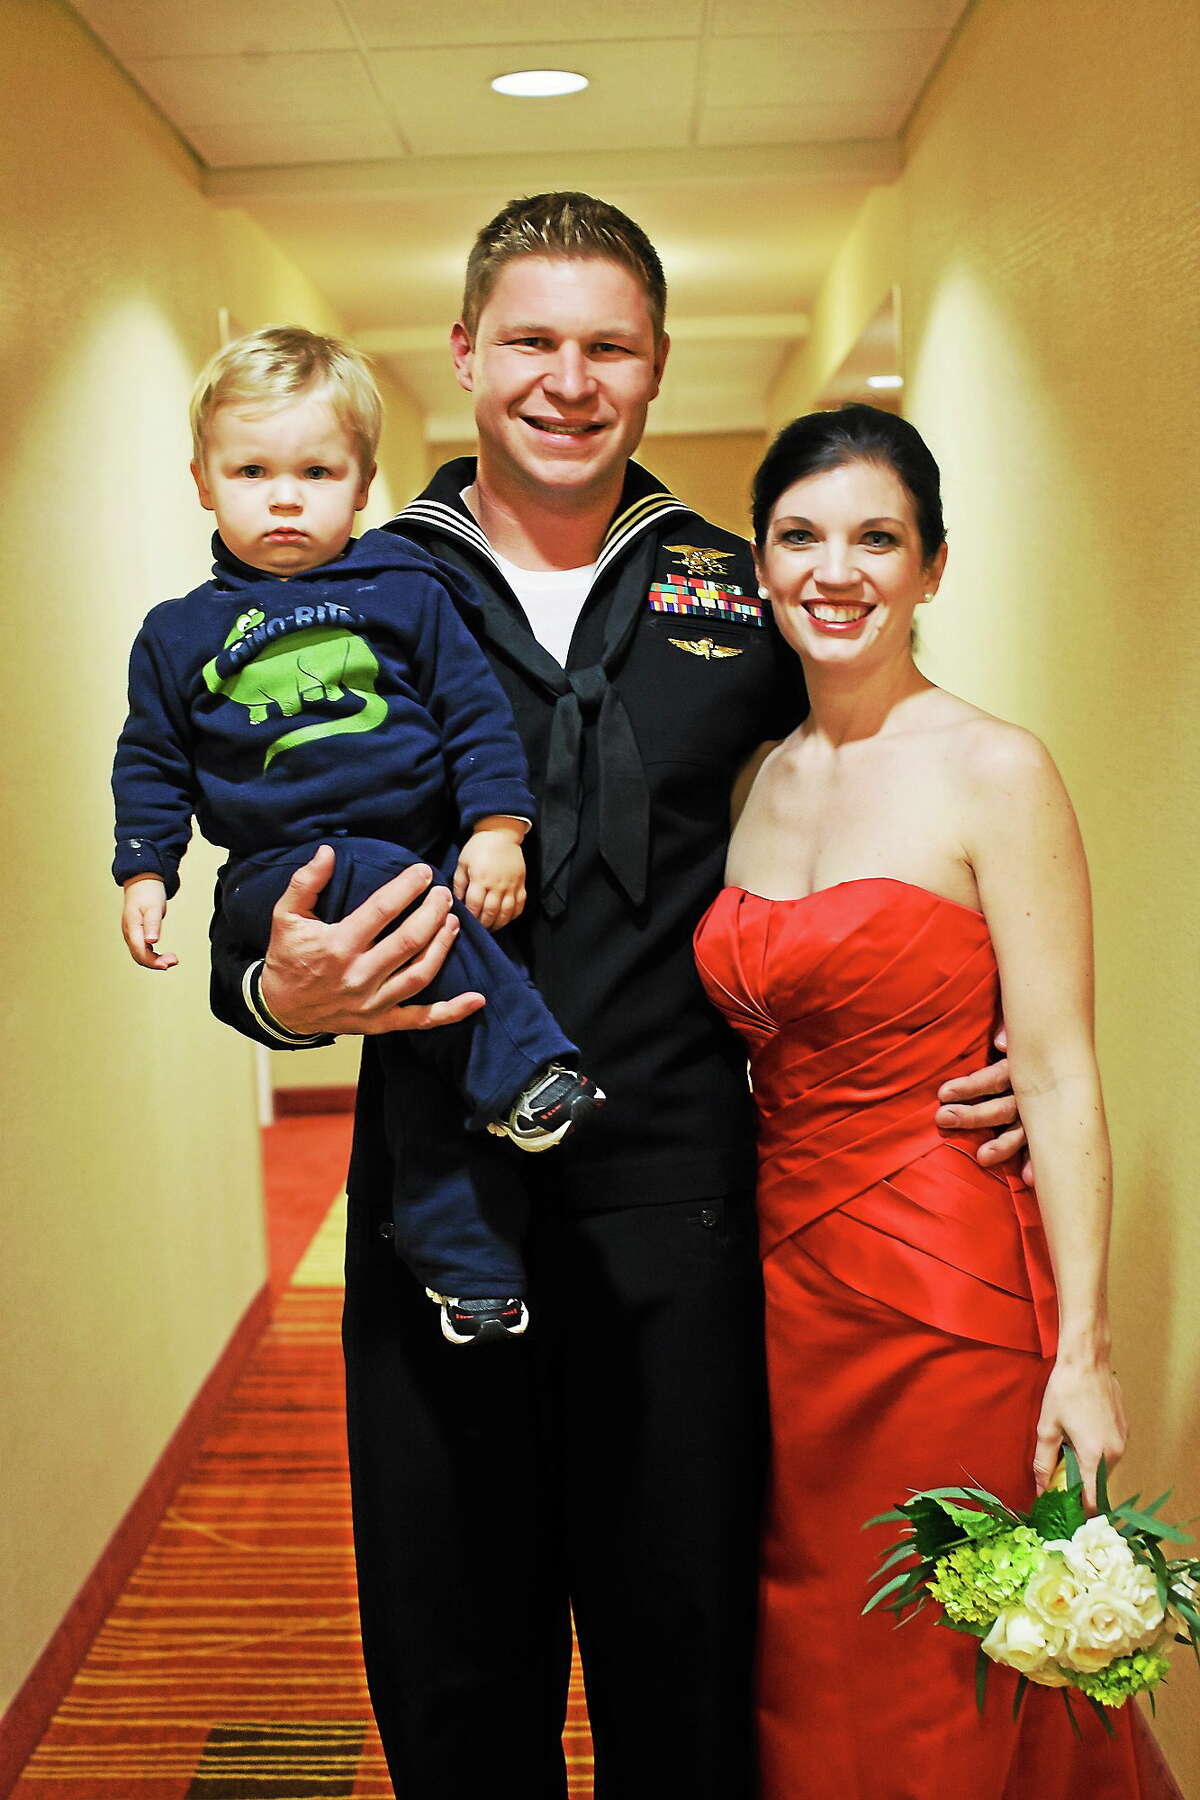 Kevin and Lindsey Lacz of Middlefield with their son.